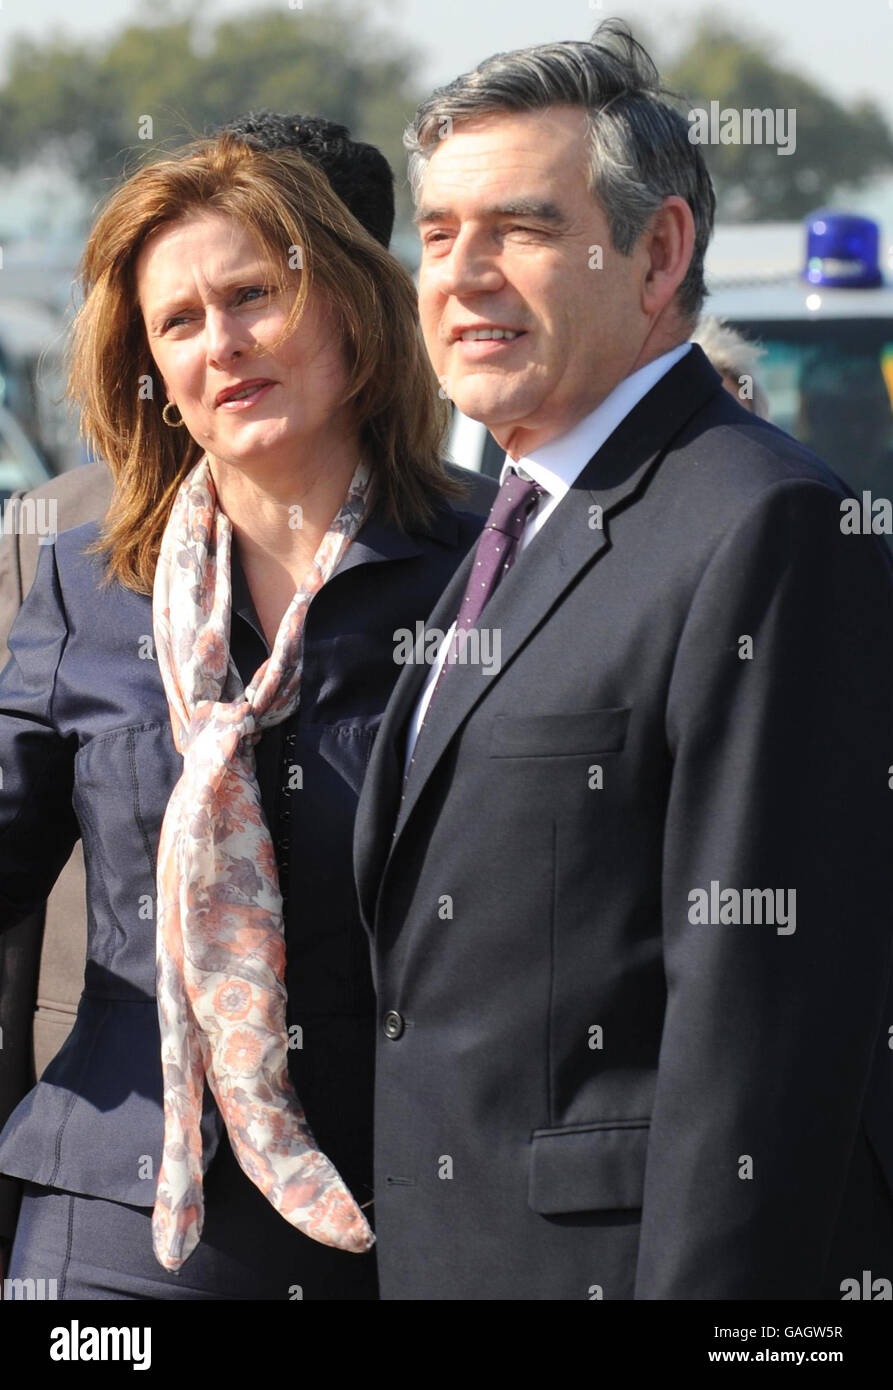 Prime Minister Gordon Brown arrives in New Delhi with his wife Sarah today on the second leg of his most far-flung diplomatic mission since taking over at Number 10. Stock Photo